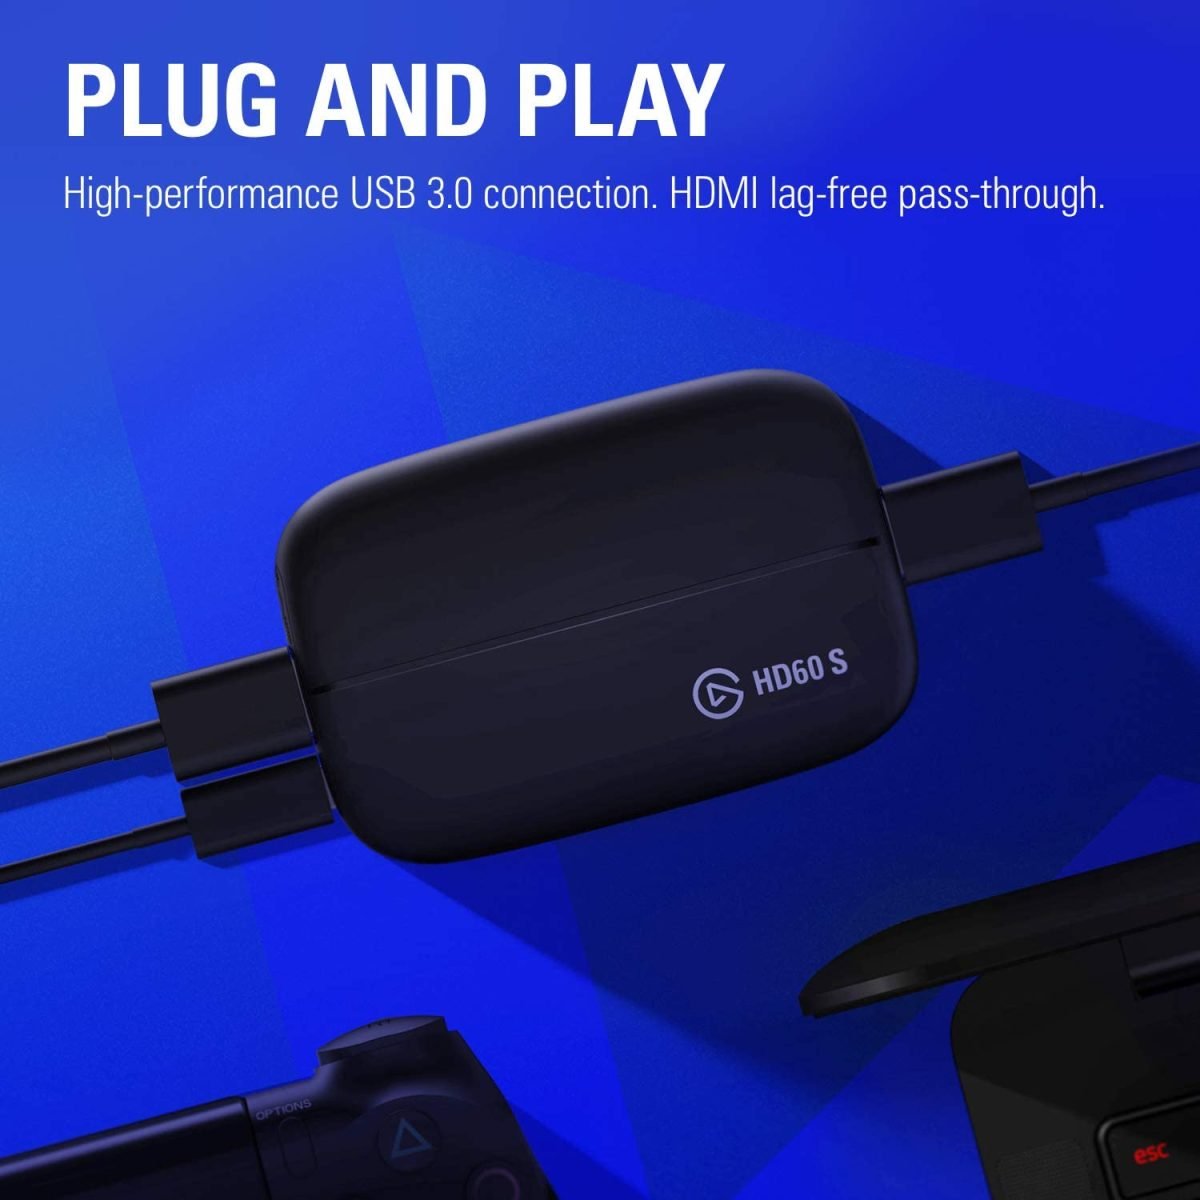 61Iwsuuol. Ac Sl1500 &Lt;H1&Gt;Elgato Game Capture Hd60S - Black&Lt;/H1&Gt; &Lt;Ul&Gt; &Lt;Li&Gt;&Lt;Span Class=&Quot;A-List-Item&Quot;&Gt; Elgato Game Capture Hd60 S, Stream And Record In 1080P60, For Playstation 4, Xbox One, Xbox 360 &Amp; Wii U &Lt;/Span&Gt;&Lt;/Li&Gt; &Lt;Li&Gt;&Lt;Span Class=&Quot;A-List-Item&Quot;&Gt; Stream And Record Your Finest Gaming Moment. Stunning 1080P Quality With 60 Fps. Supported Resolutions - 1080P60, 1080P30, 1080I, 720P60, 720P30, 576P, 576I And 480P &Lt;/Span&Gt;&Lt;/Li&Gt; &Lt;Li&Gt;&Lt;Span Class=&Quot;A-List-Item&Quot;&Gt; State-Of-The-Art Usb 3.0 Type C Connection. Built-In Live Streaming To Twitch, Youtube &Amp; More. Instant Gameview: Stream With Superior Low Latency Technology &Lt;/Span&Gt;&Lt;/Li&Gt; &Lt;Li&Gt;&Lt;Span Class=&Quot;A-List-Item&Quot;&Gt; The Built-In Live Streaming Feature Gets You Up And Running On Twitch Or Youtube In A Snap. With Stream Command, Customize Your Stream Layout Without Limits. Add Your Webcam, Overlays, Alerts And More And Change Your Stream Layout On-The-Fly With Scenes. Add Your Voice With The Built-In Live Commentary Feature &Lt;/Span&Gt;&Lt;/Li&Gt; &Lt;Li&Gt;&Lt;Span Class=&Quot;A-List-Item&Quot;&Gt; Supported Os - Windows 10 (64-Bit). Macos Sierra 10.12 Or Later &Lt;/Span&Gt;&Lt;/Li&Gt; &Lt;/Ul&Gt; Game Capture Elgato Game Capture Hd60S - Black